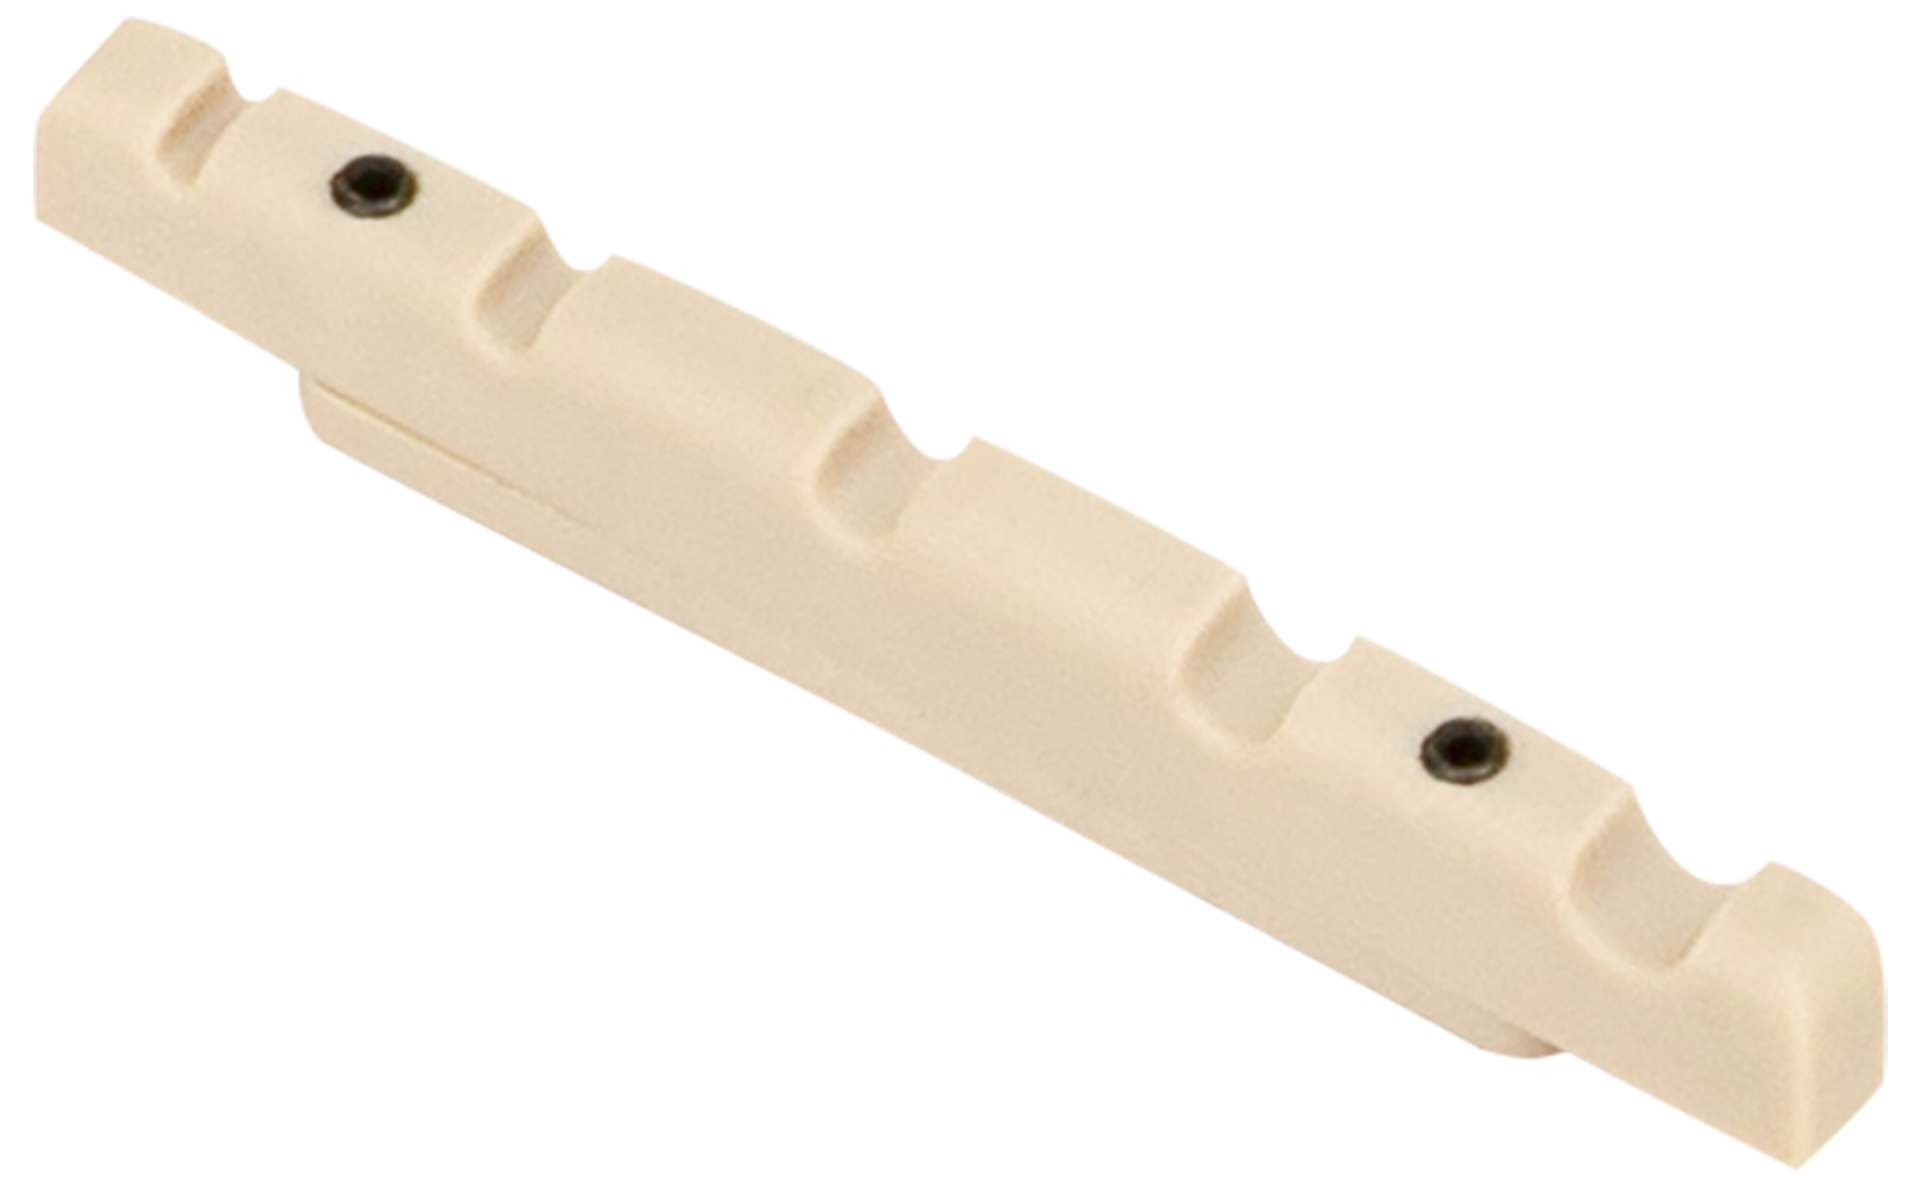 Sadowsky Parts - Just-A-Nut III - 5 String - 48.1 mm (1.875")